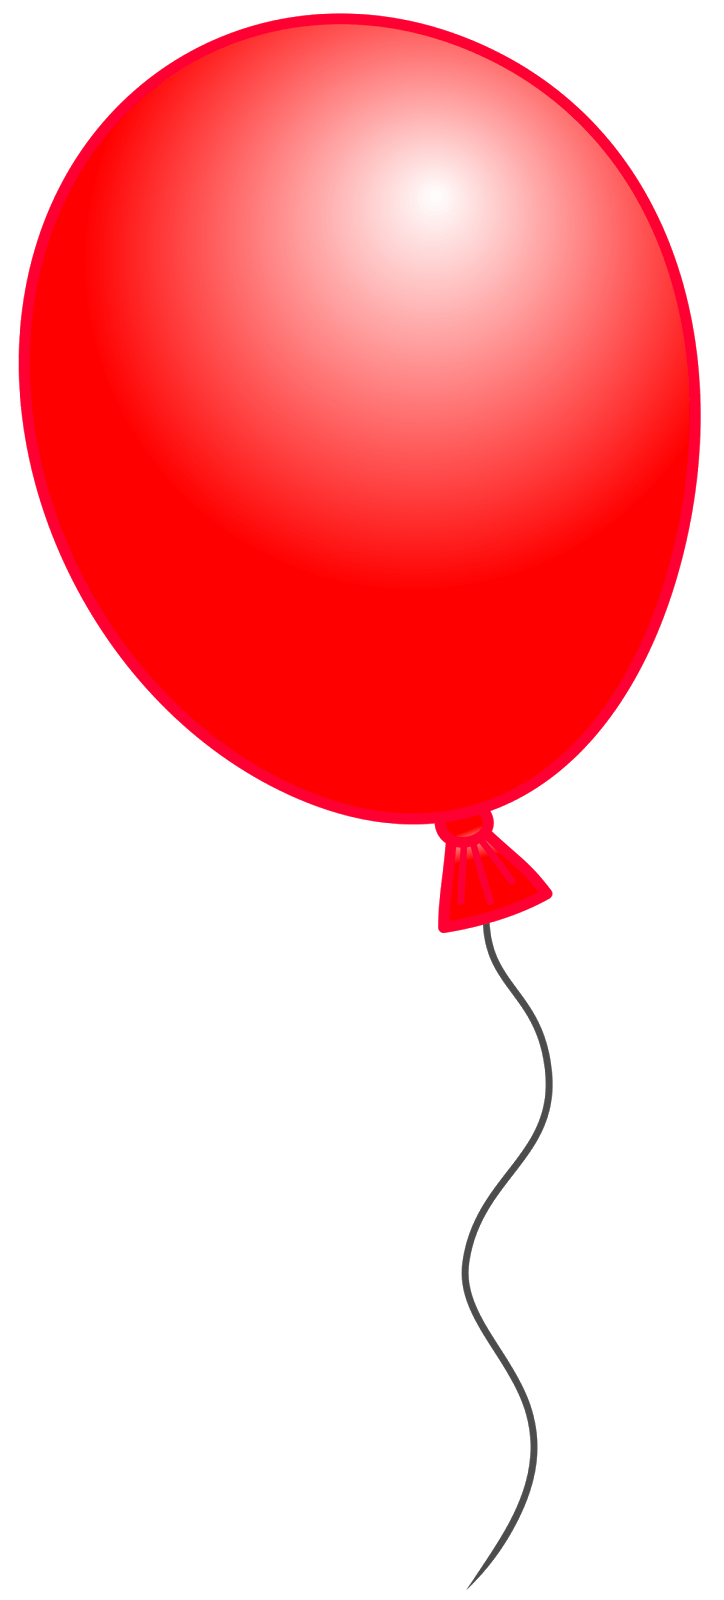 Free Balloon Template Cliparts Download Free Balloon Template Cliparts 